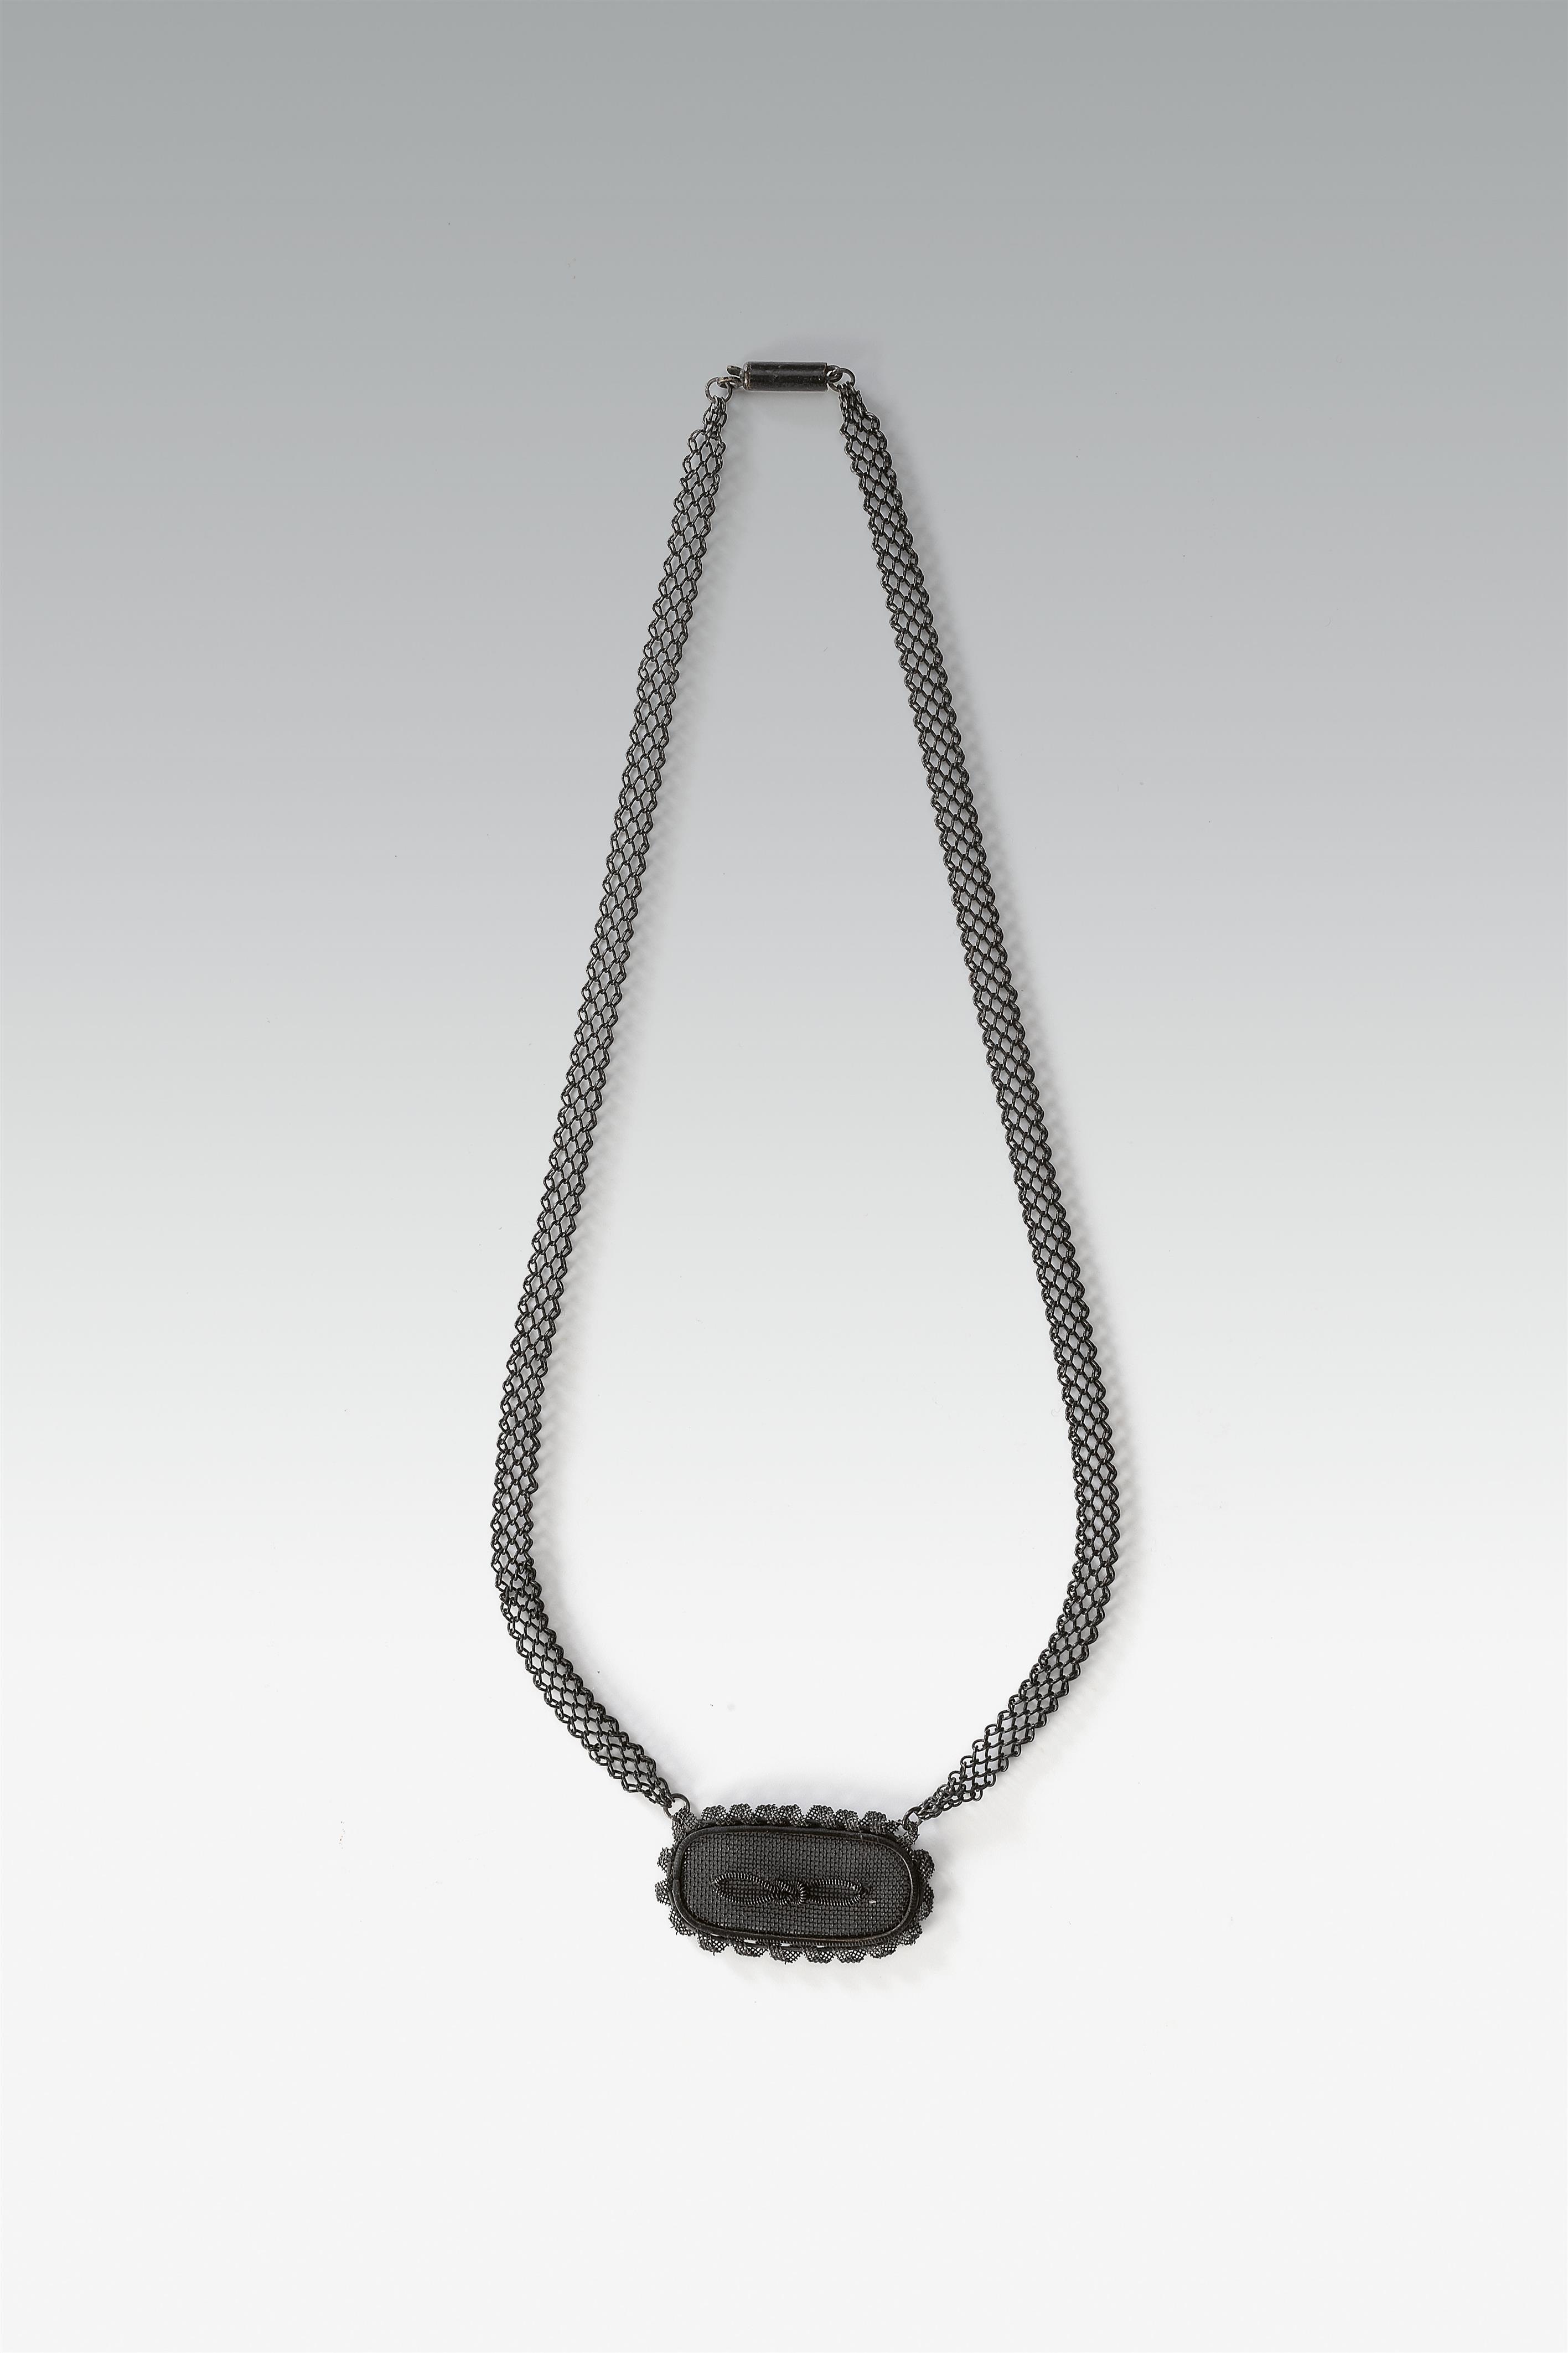 A cast iron pendant necklace with braided iron wire - image-1